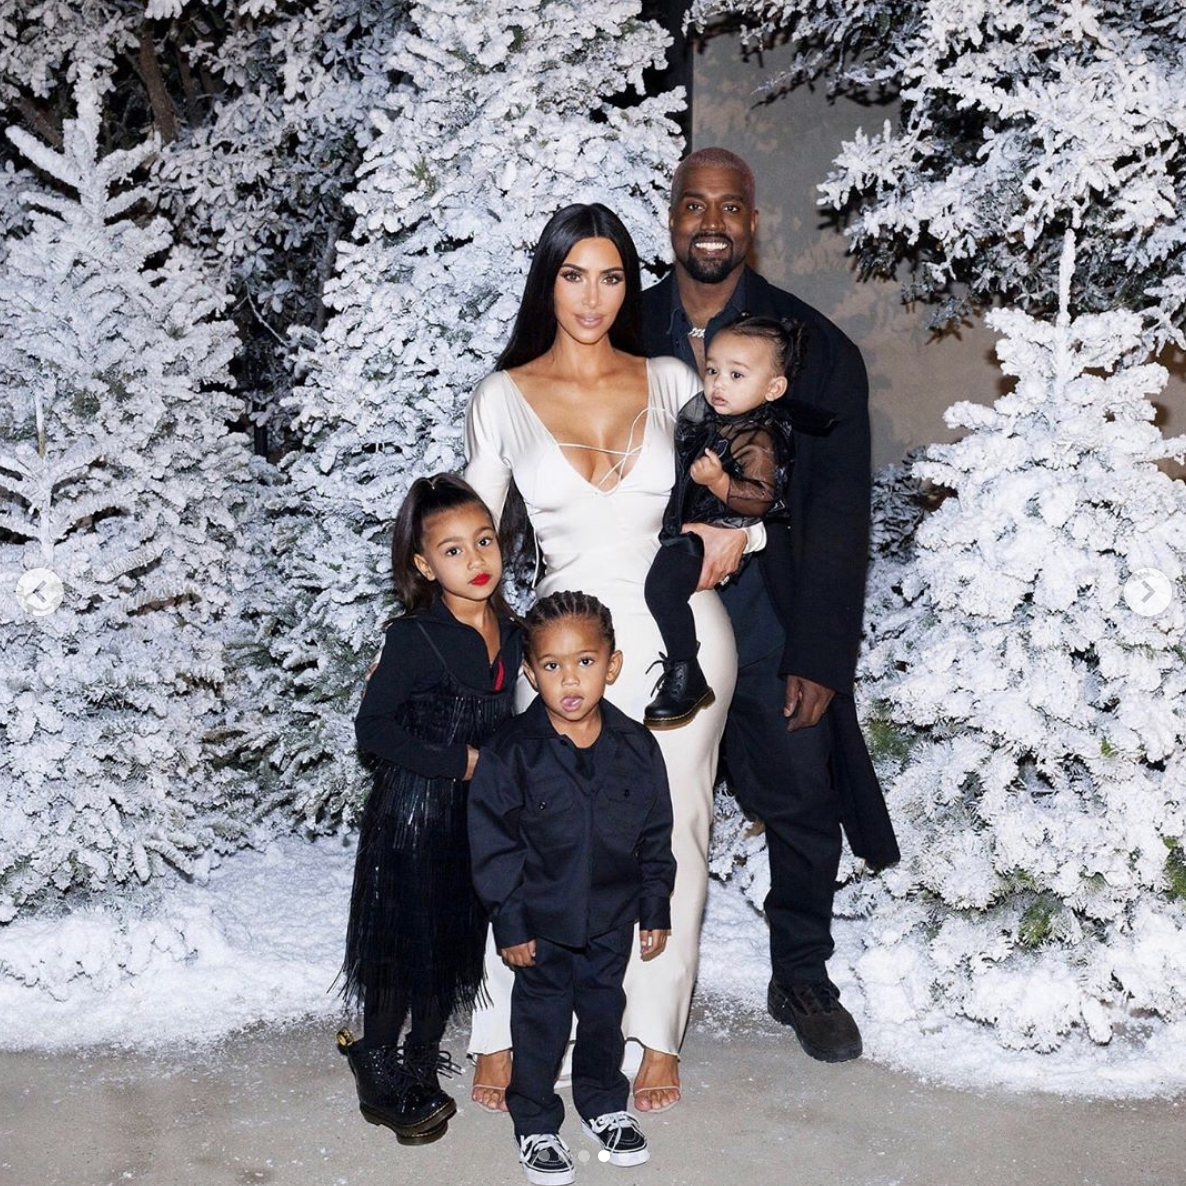 The Famous Kardashian Christmas Parties Through the Years